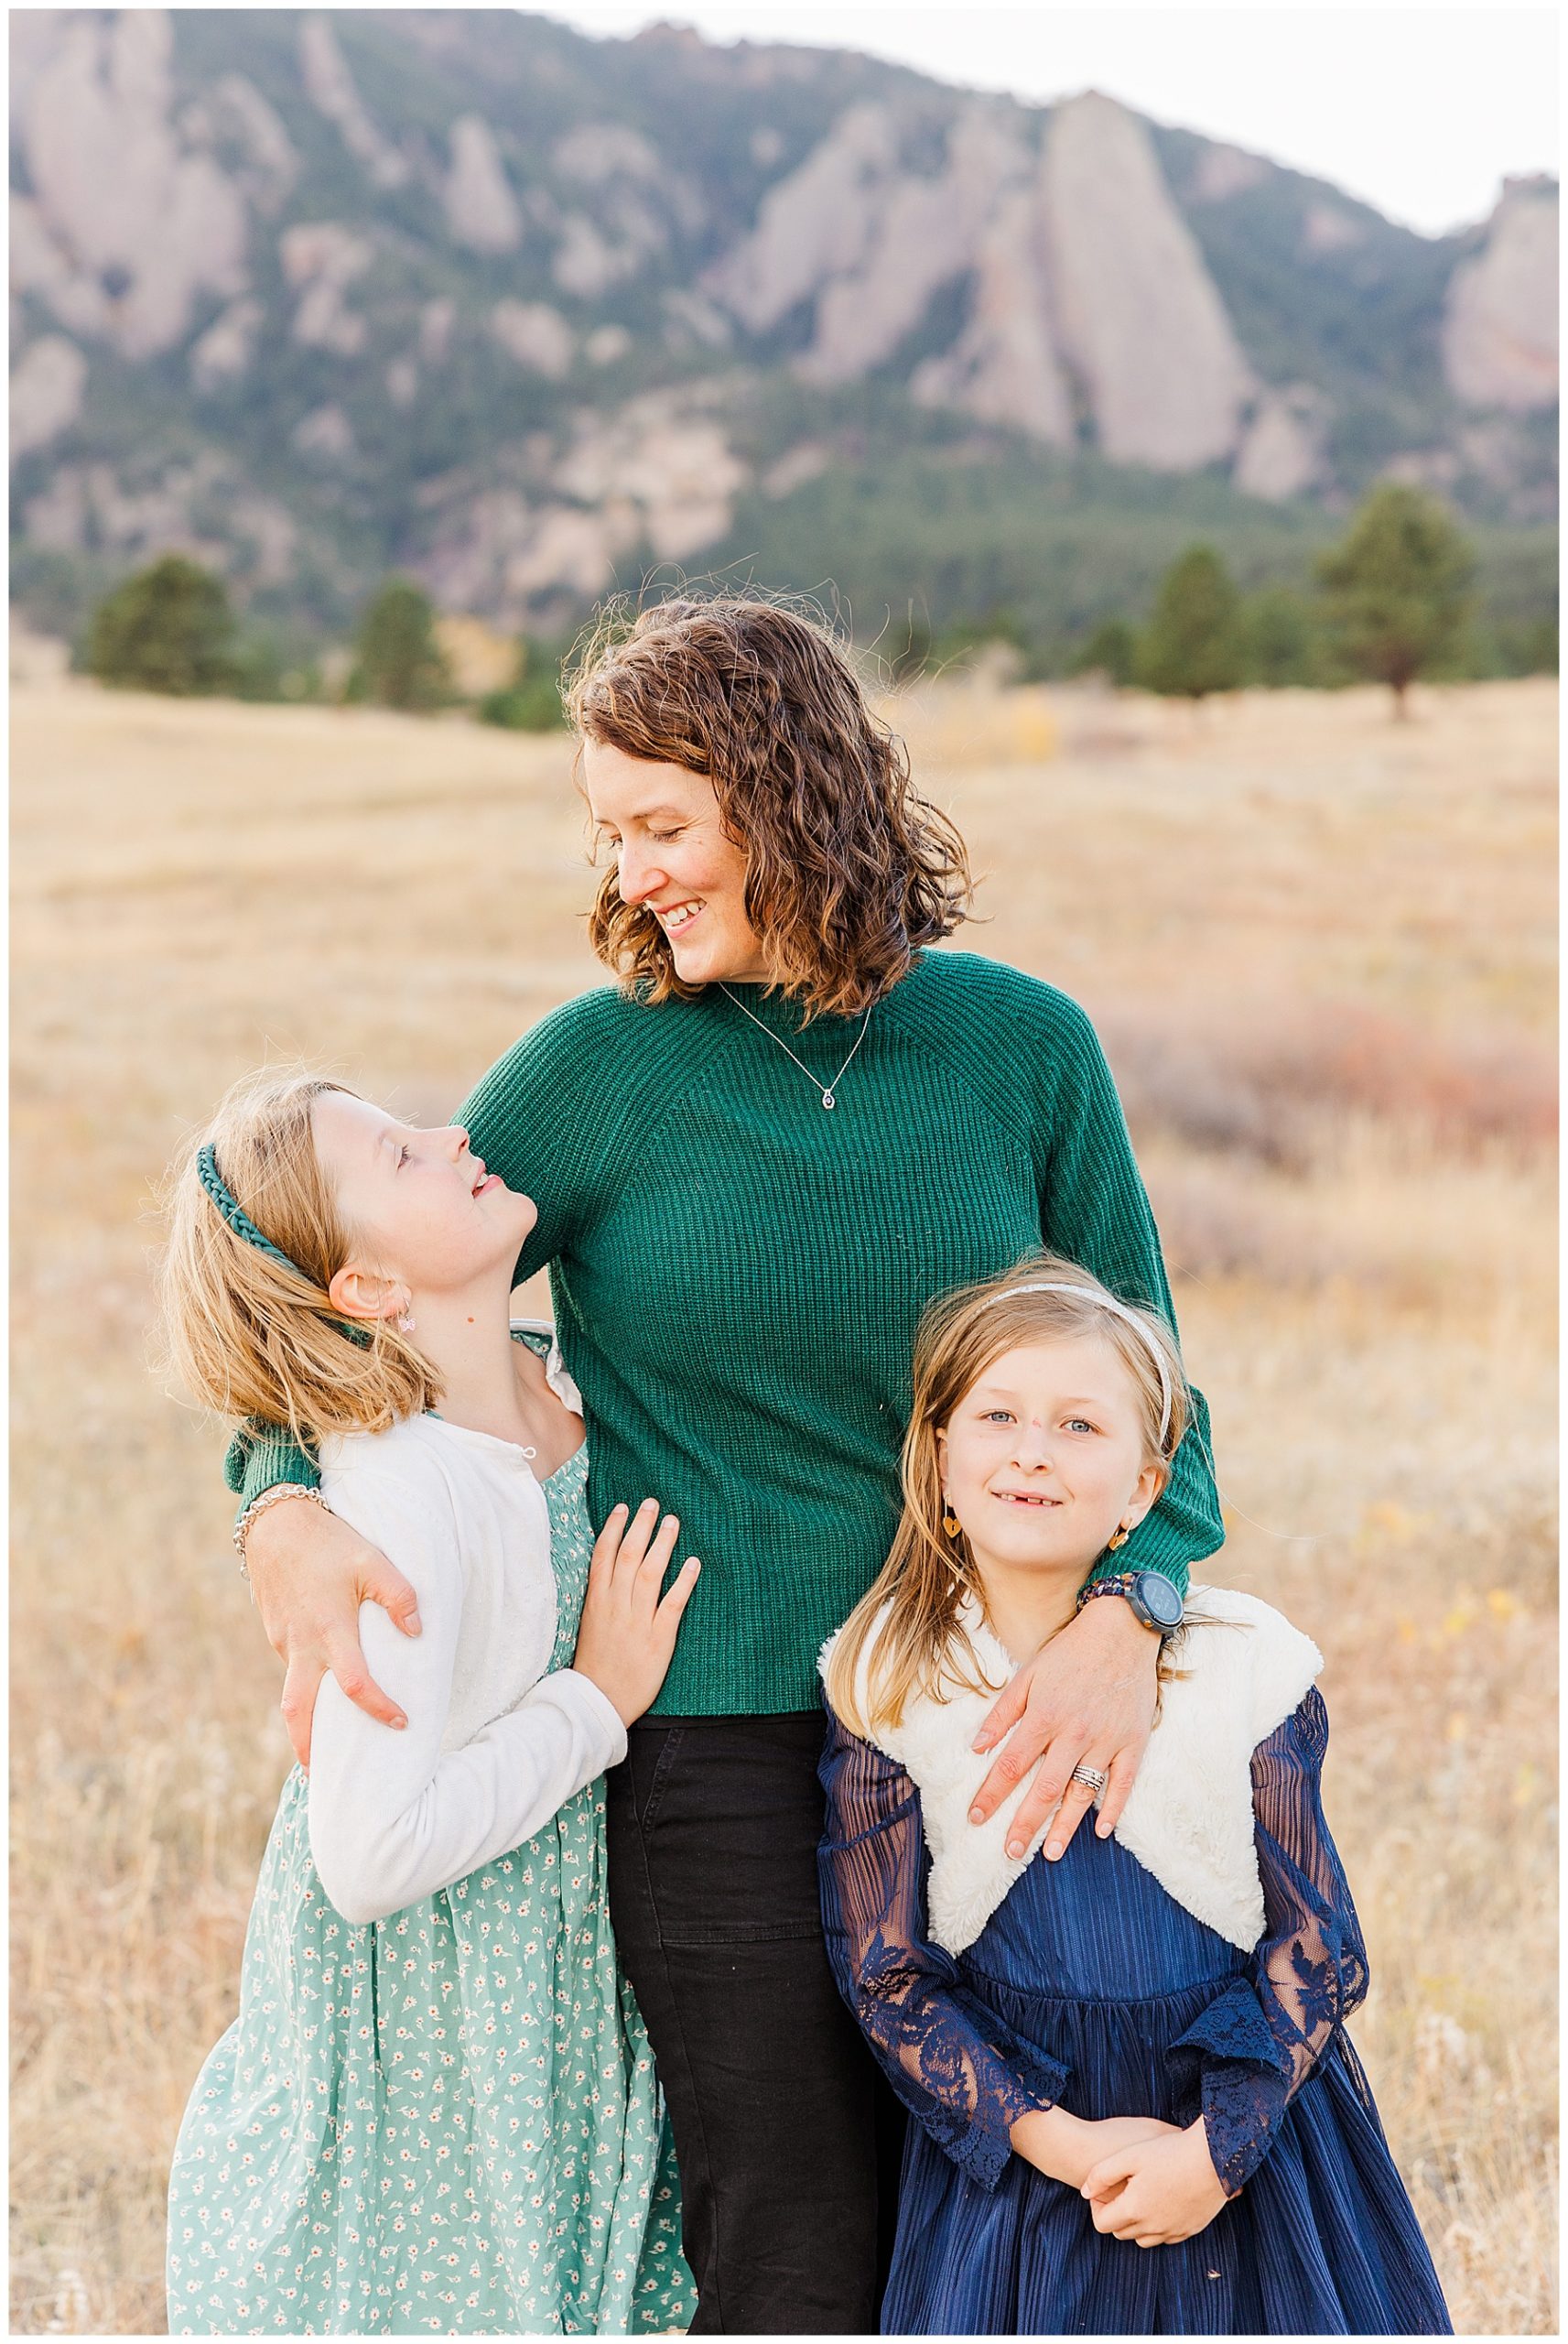 Oldest daughter looks up at her mother who has her arms around both girls in an open field in Colorado